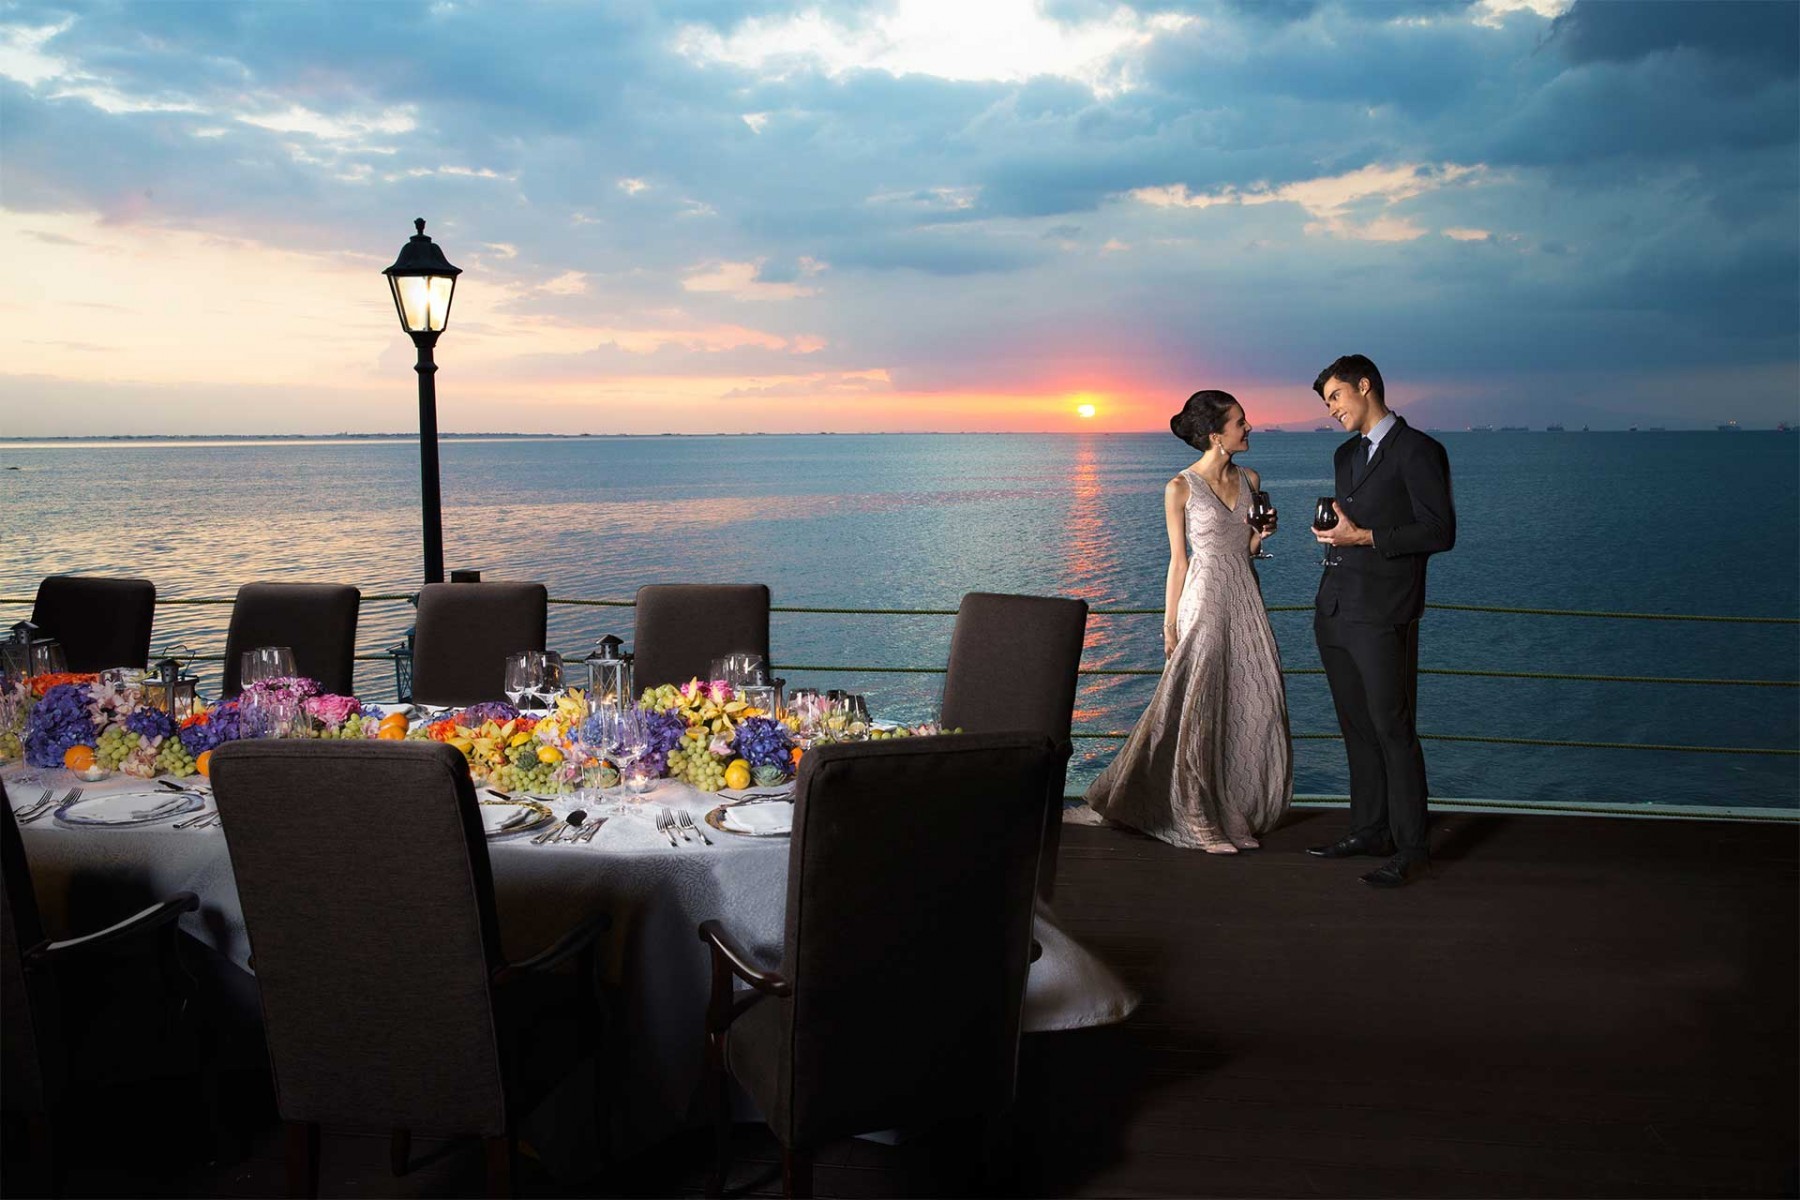 celebrate your wedding reception at the famous hotel in the philippines - Sofitel Hotel